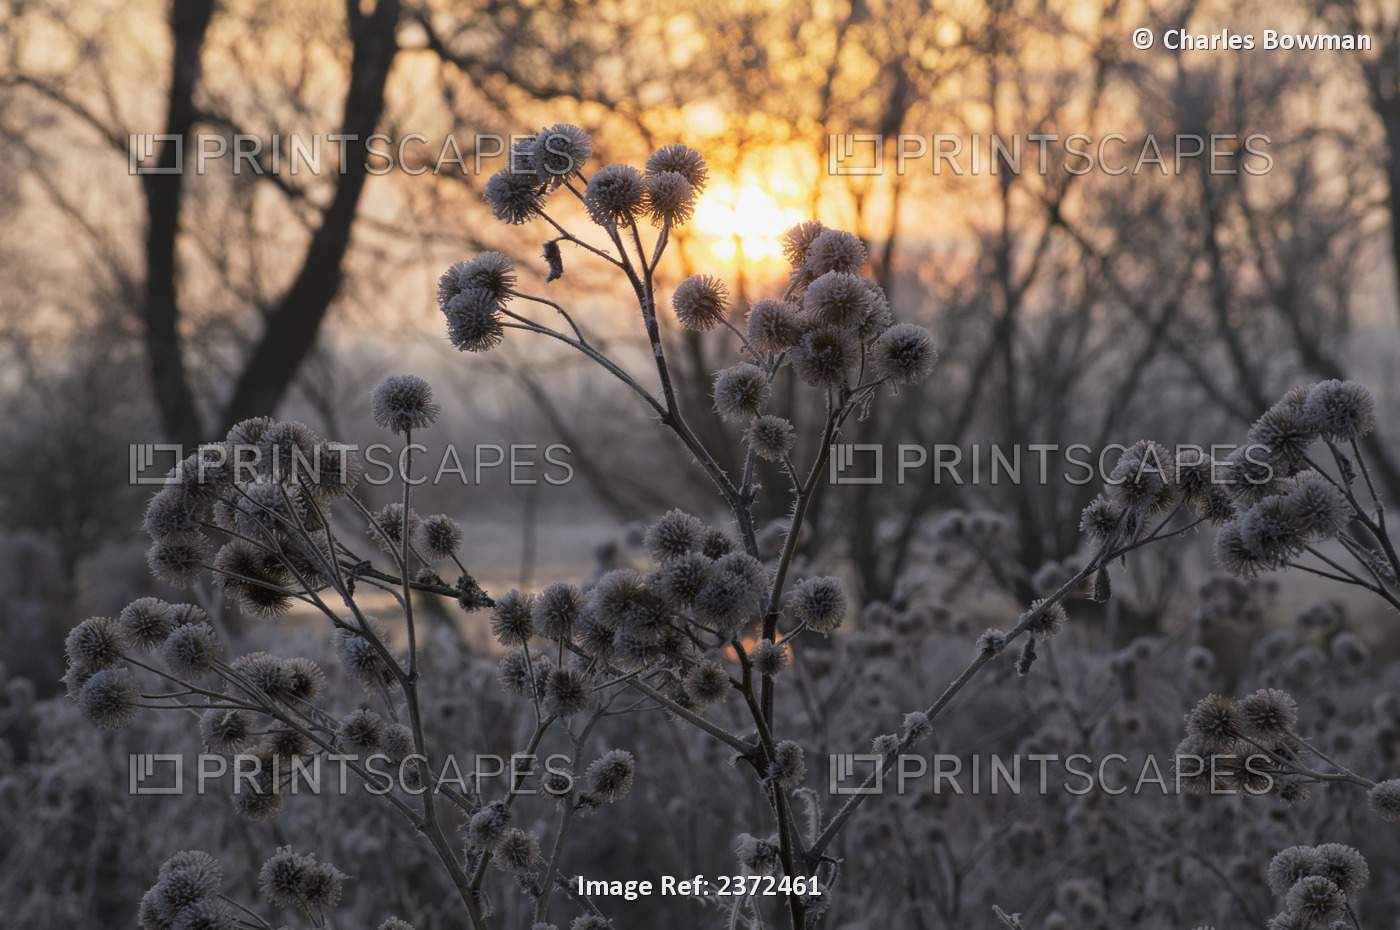 Glowing Sunset In Winter With Frozen Trees And Plants In The Foreground; ...